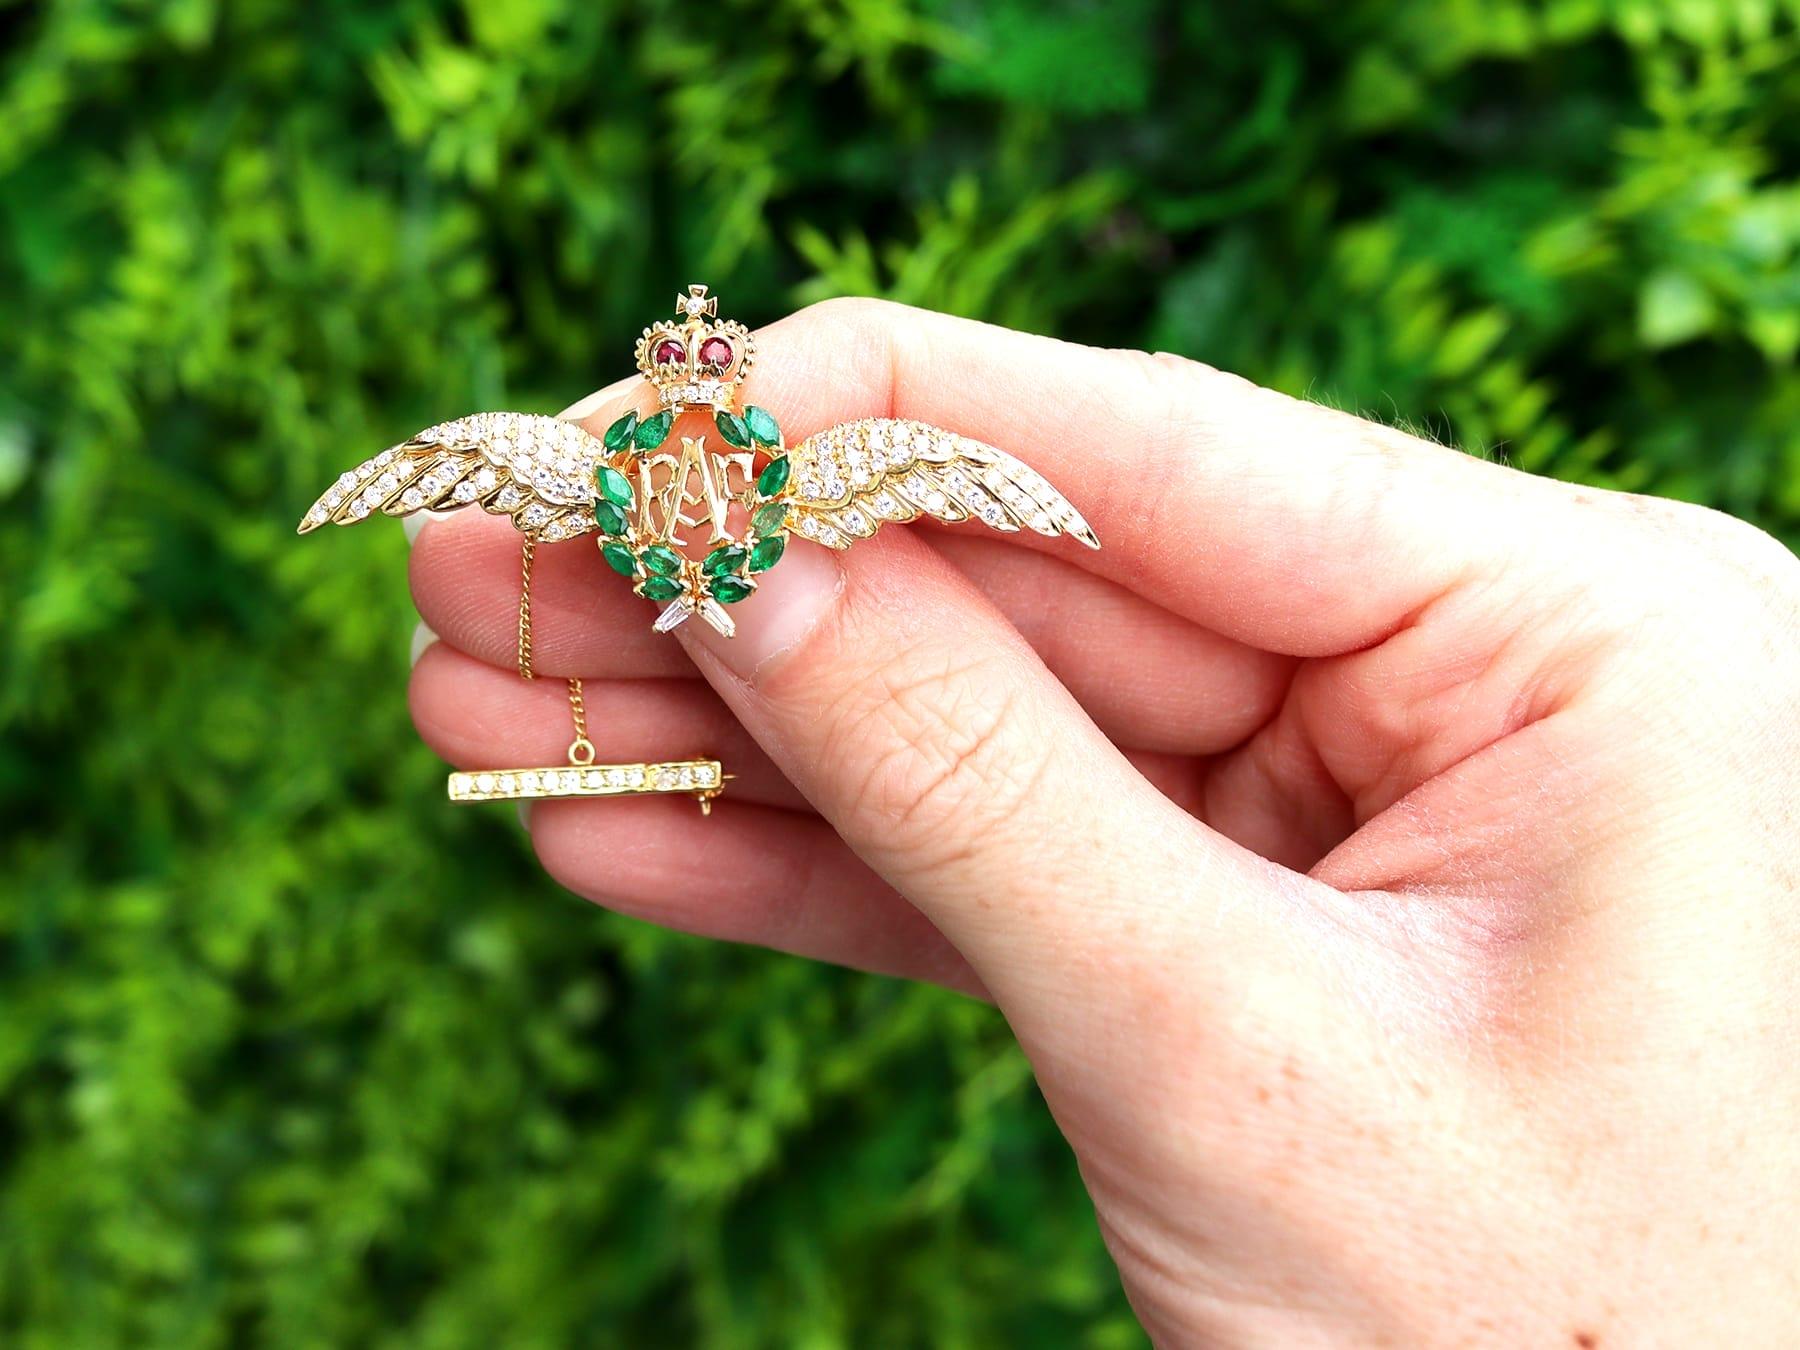 A fine and impressive vintage 0.96 carat emerald, 0.07 carat ruby and 0.78 carat diamond, 18 karat yellow gold RAF brooch; part of our collection of sweetheart brooches.

This stunning, fine and impressive vintage brooch has been crafted in 18k